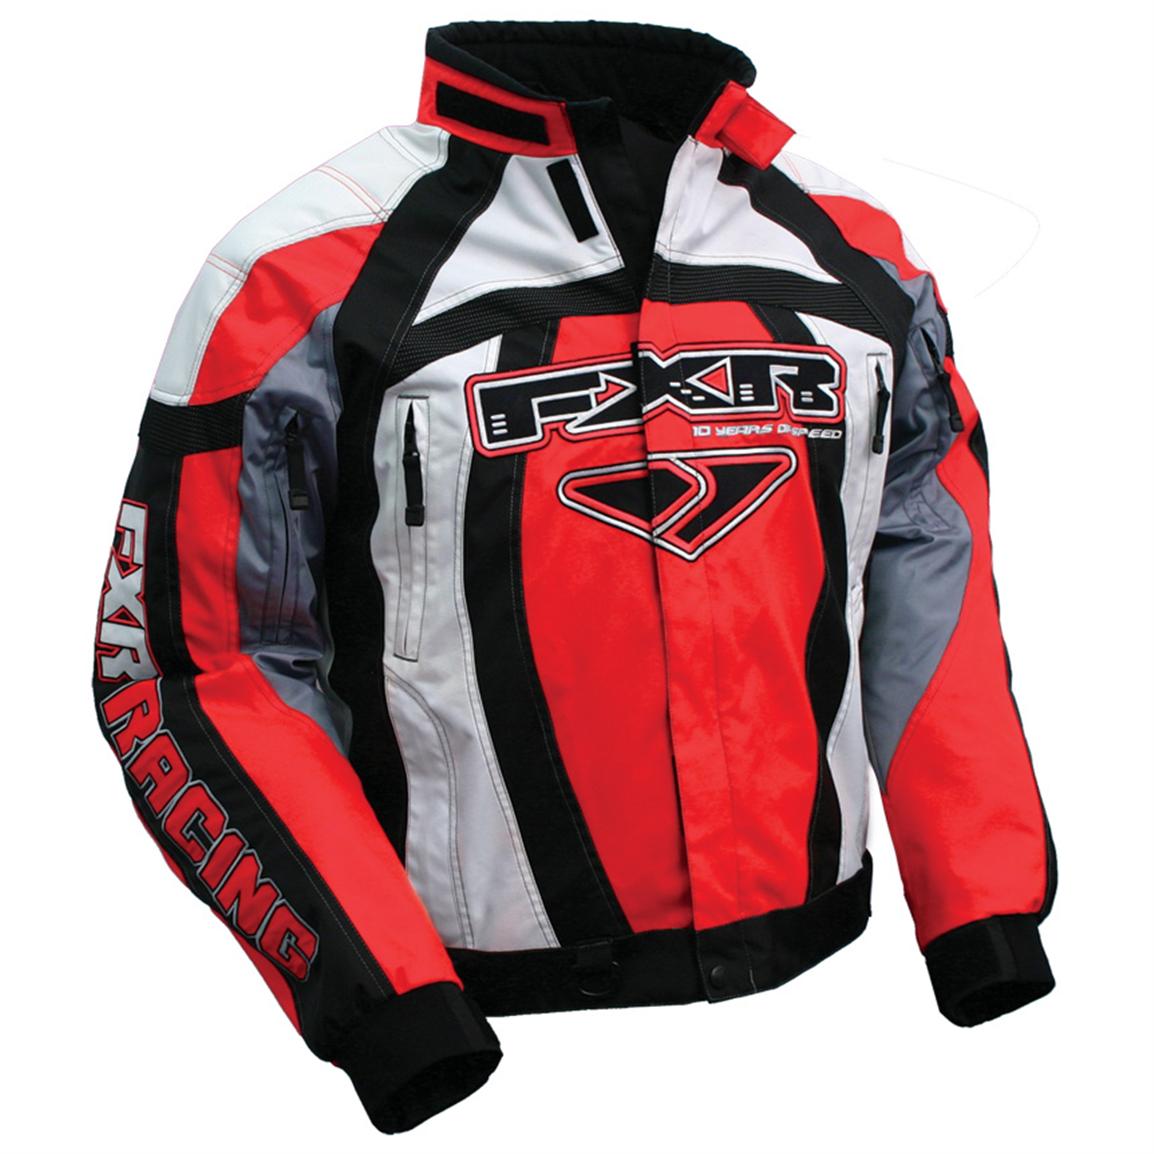 FXR® Nitro SX Race Jacket - 26837, Snowmobile Clothing at Sportsman's Guide